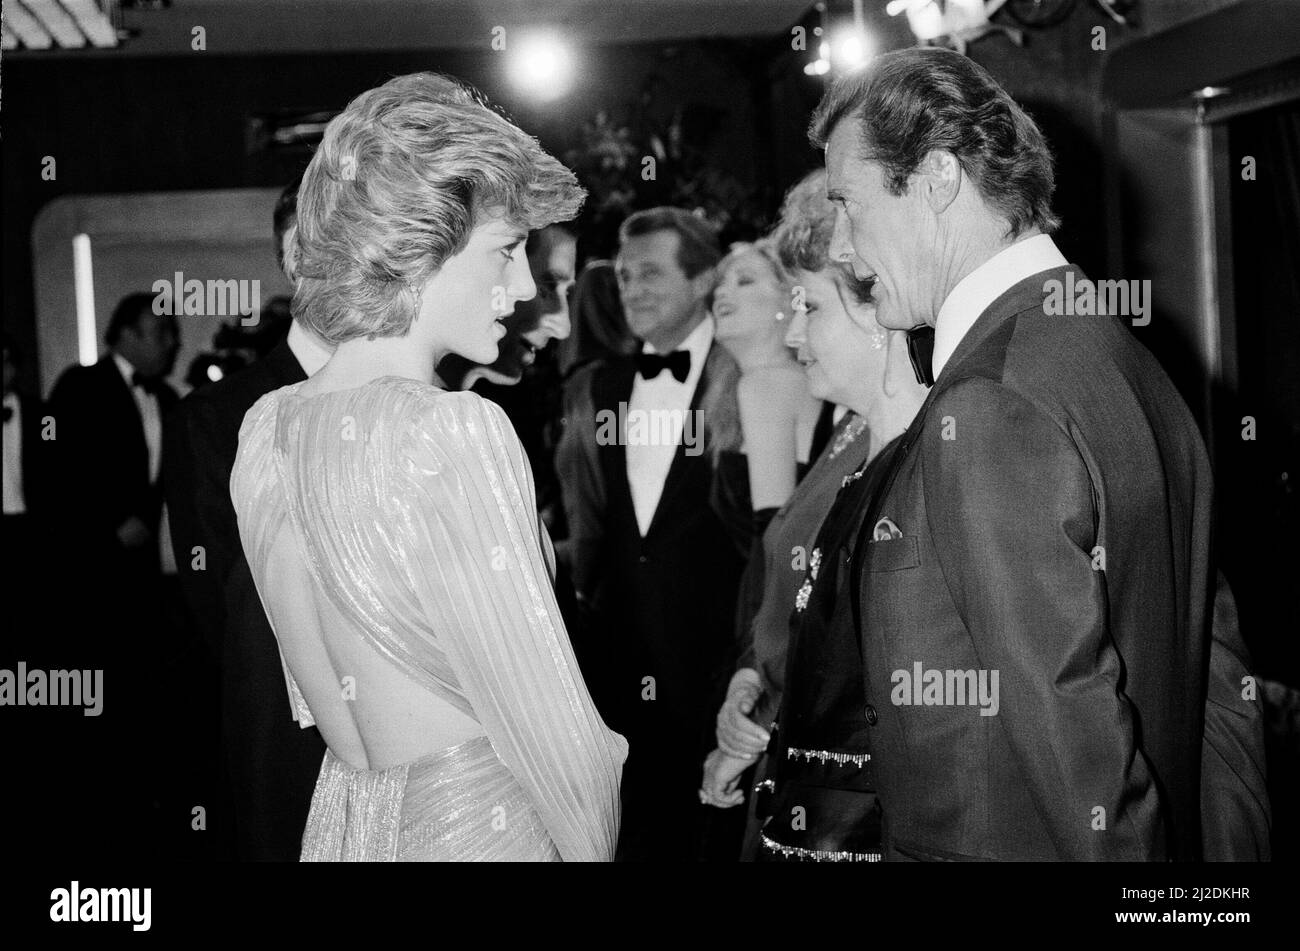 HRH The Princess of Wales, Princess Diana talking with lead actor Roger Moore at The Royal Premiere of the 14th 007 James Bond Movie, 'A View To A Kill'  at the Odeon Cinema, Leicester Square, London. This was Roger Moore's last of seven Bond Films. His first 'Live and Let Die', was released in 1973.  Princess Diana wears a stunning silver Bruce Oldfield dress.   In the background is actor Patrick Macnee, who plays Sir Godfrey Tibbett in the film.  Picture taken 14th June 1985 Stock Photo